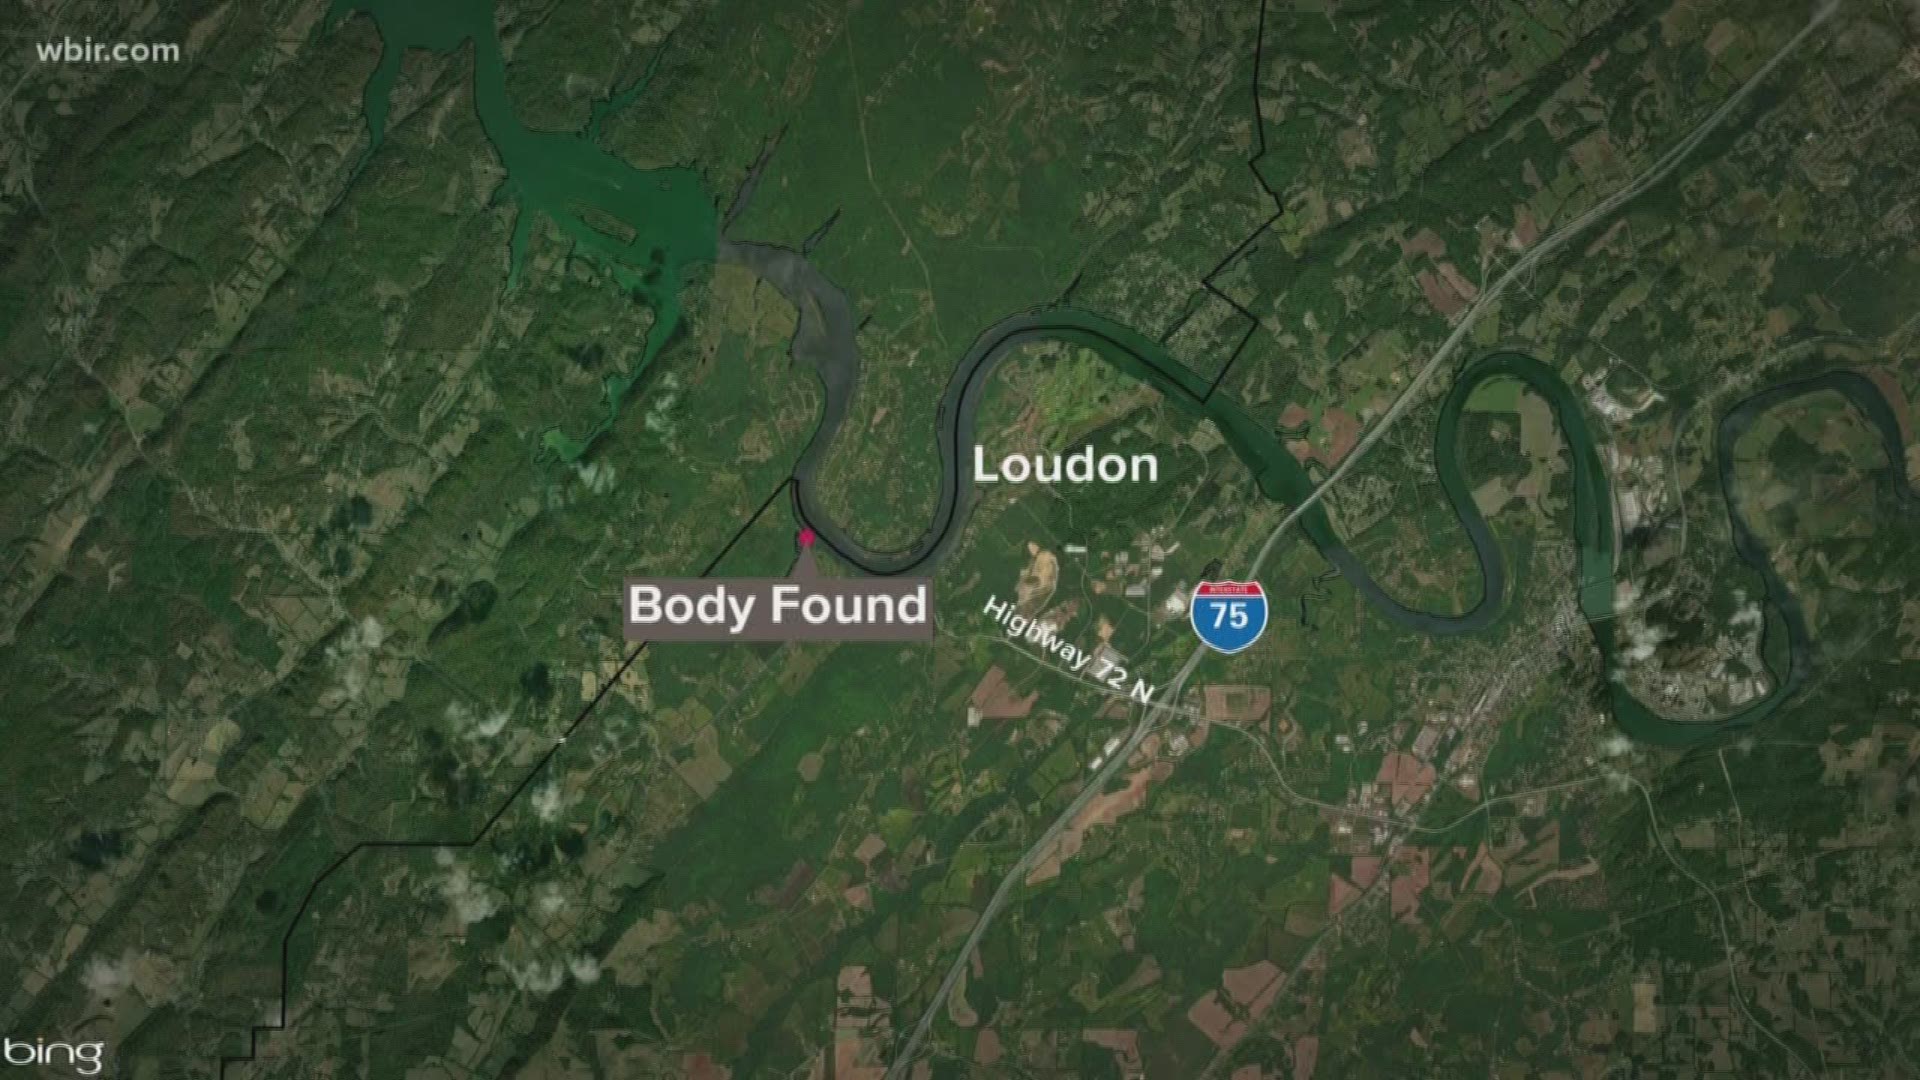 Authorities now believe the body found in the water near Highway 72 may be missing Loudon County woman Elisha Carpenter.